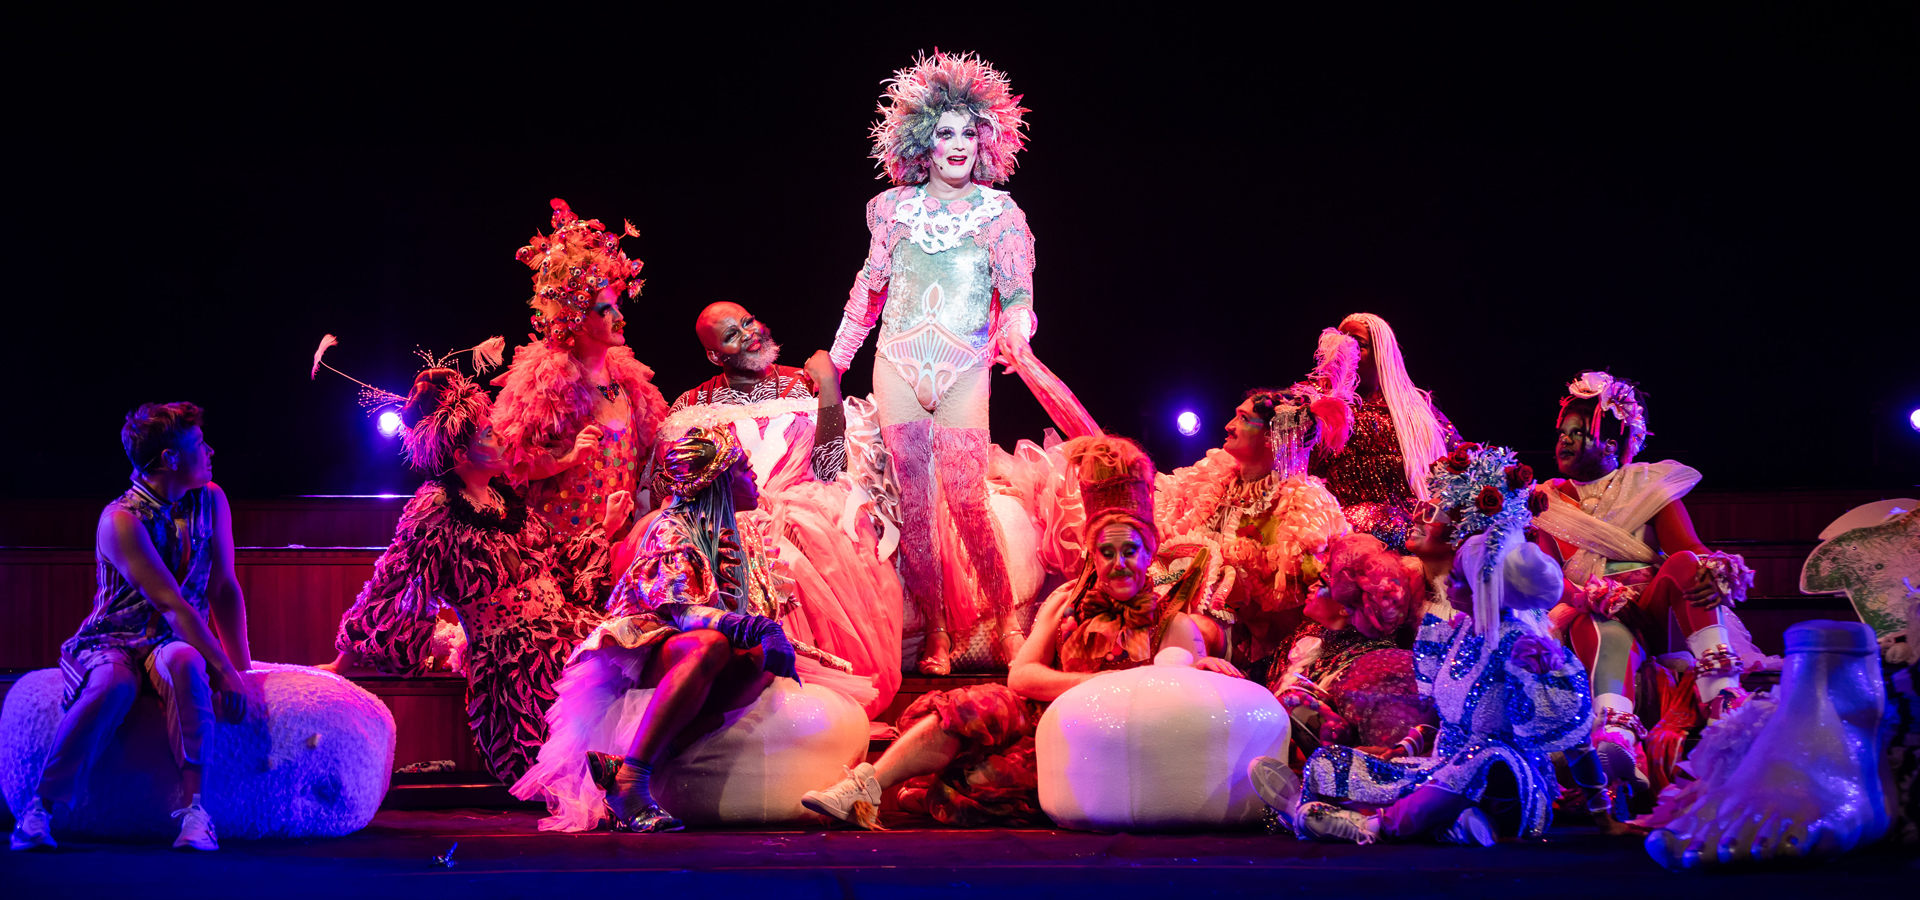 The bark of millions performers wear elaborately textured neon costumes and wigs, posing in a group on stage.